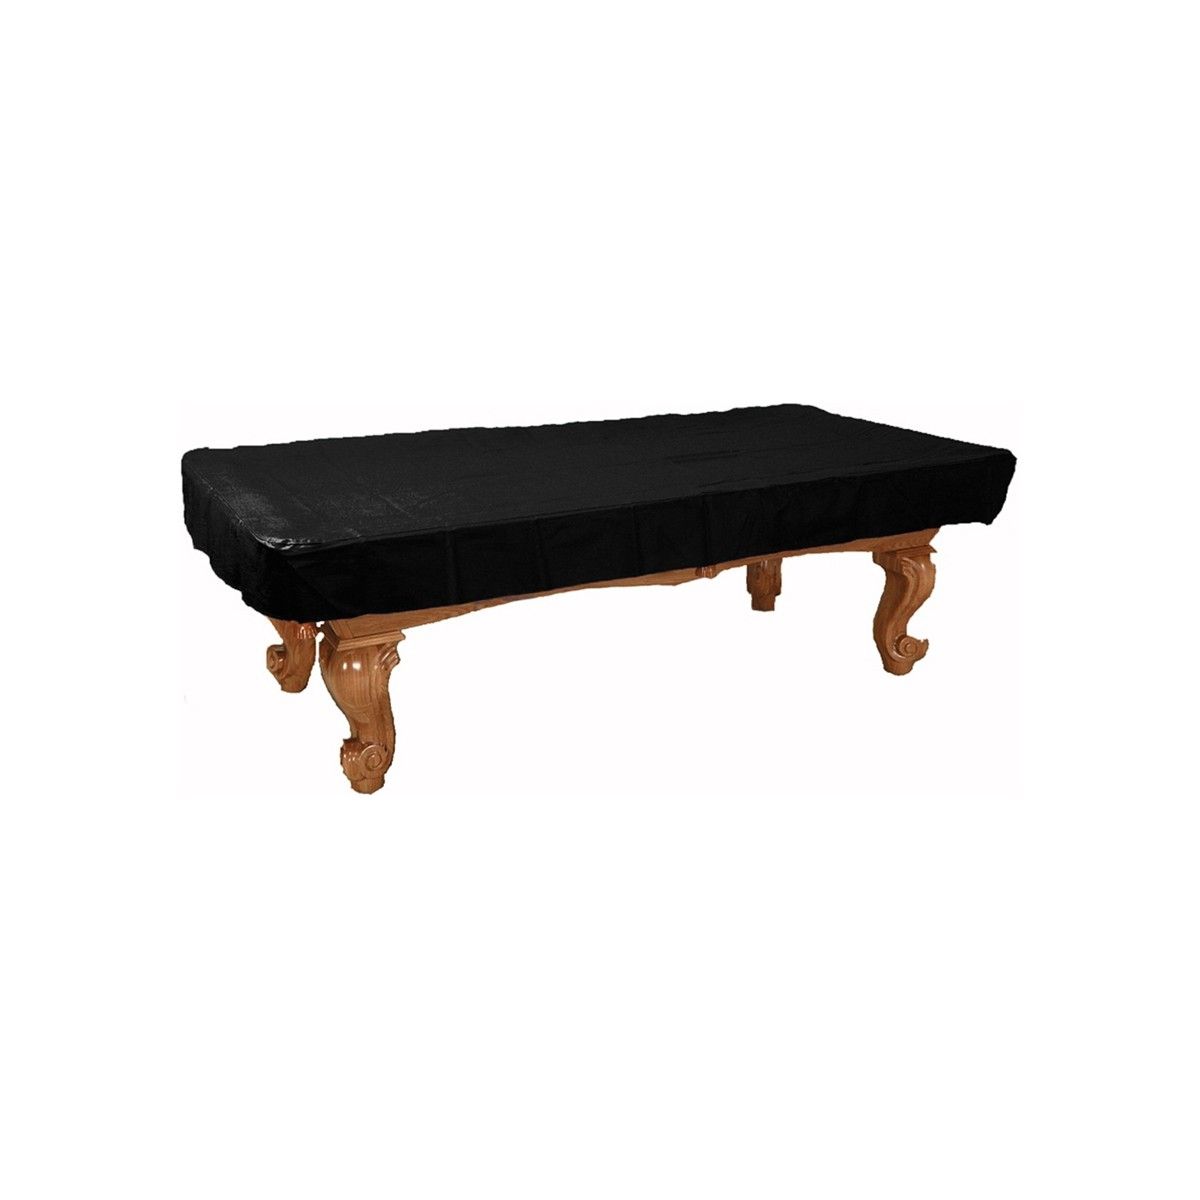 Imperial Naugahyde Fitted 7-ft. Black Pool Table Cover